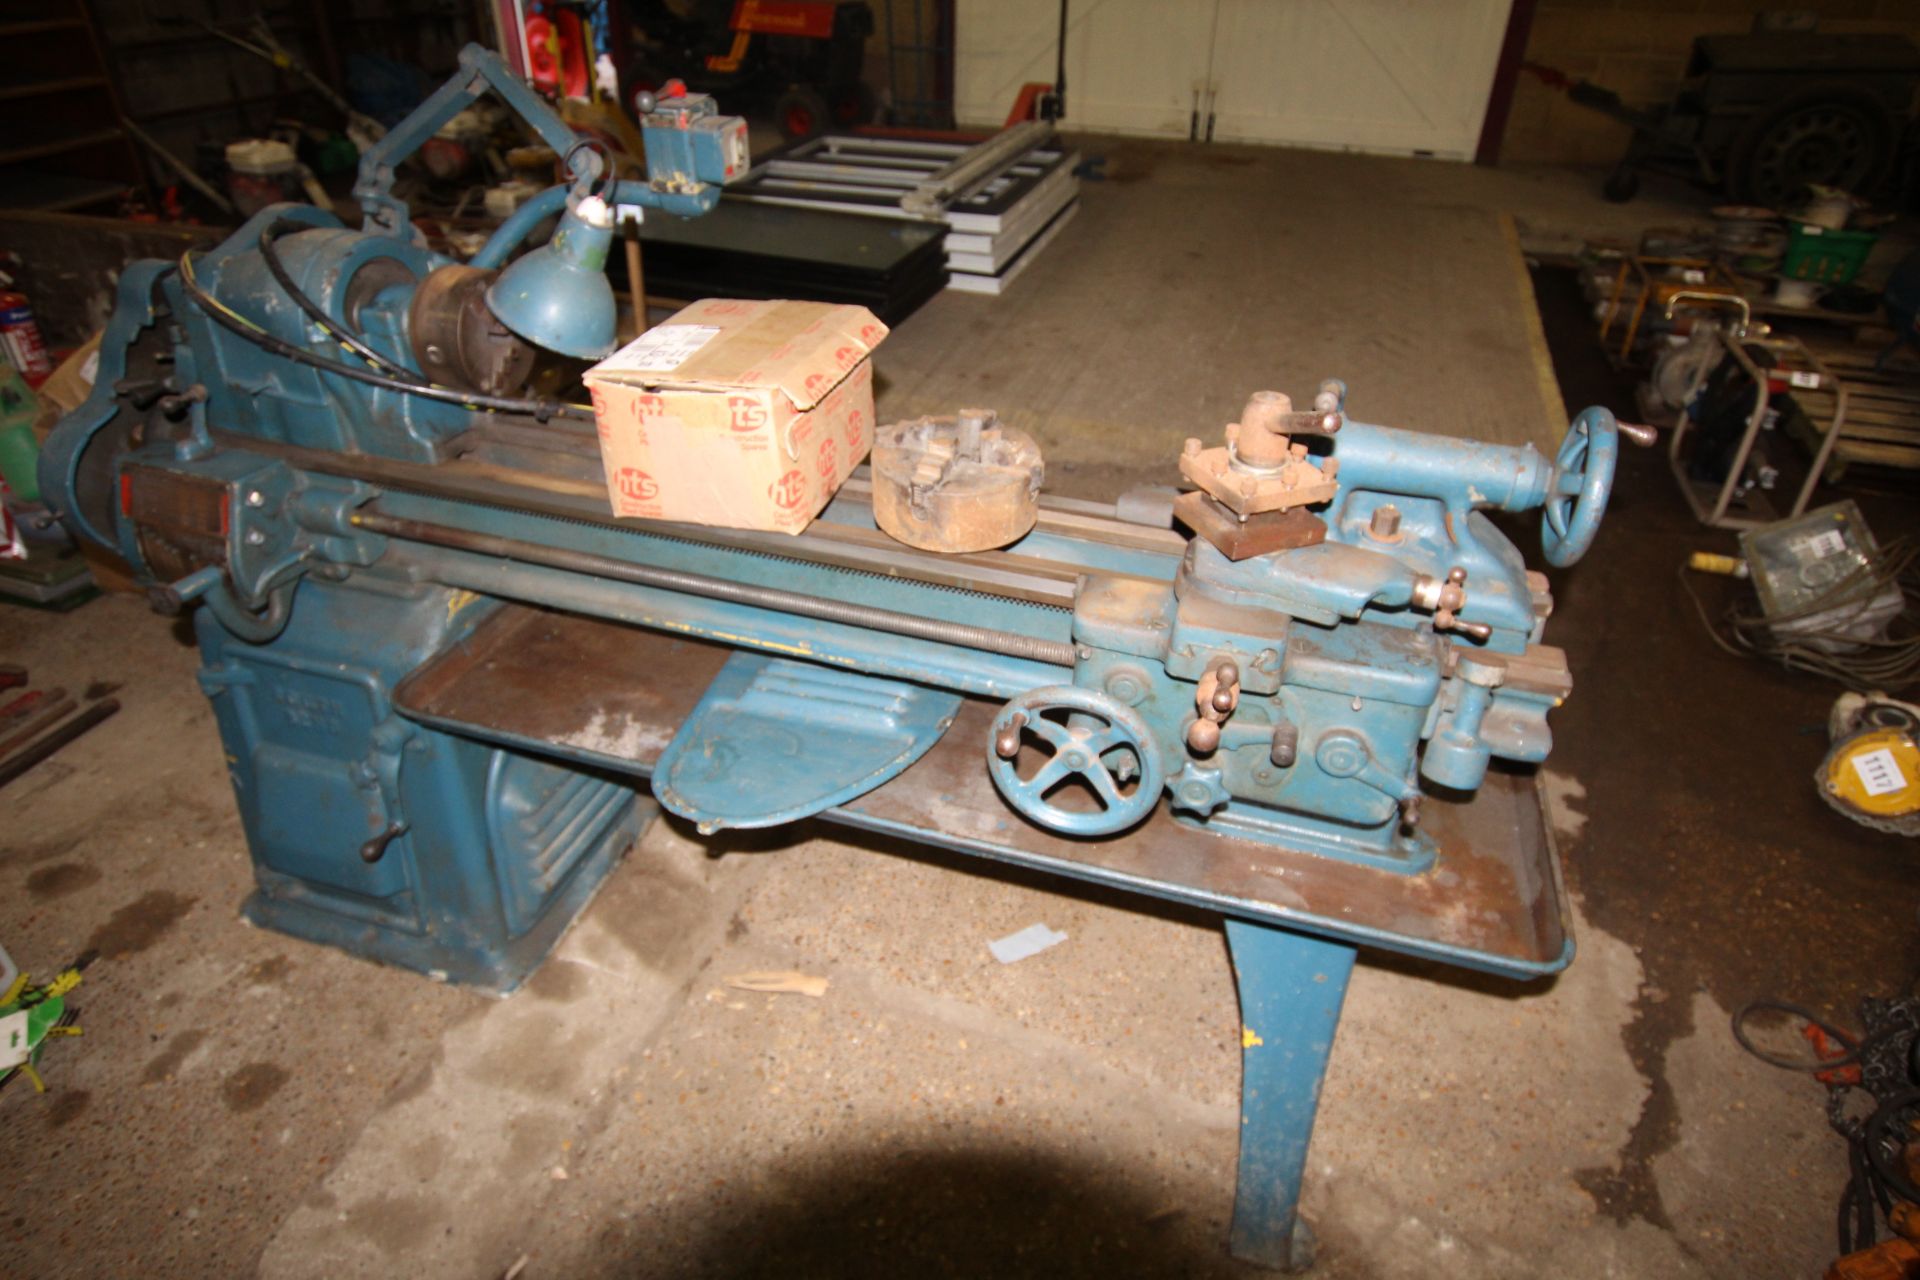 Southlands metal working lathe. With 2.5ft bed and some tooling.